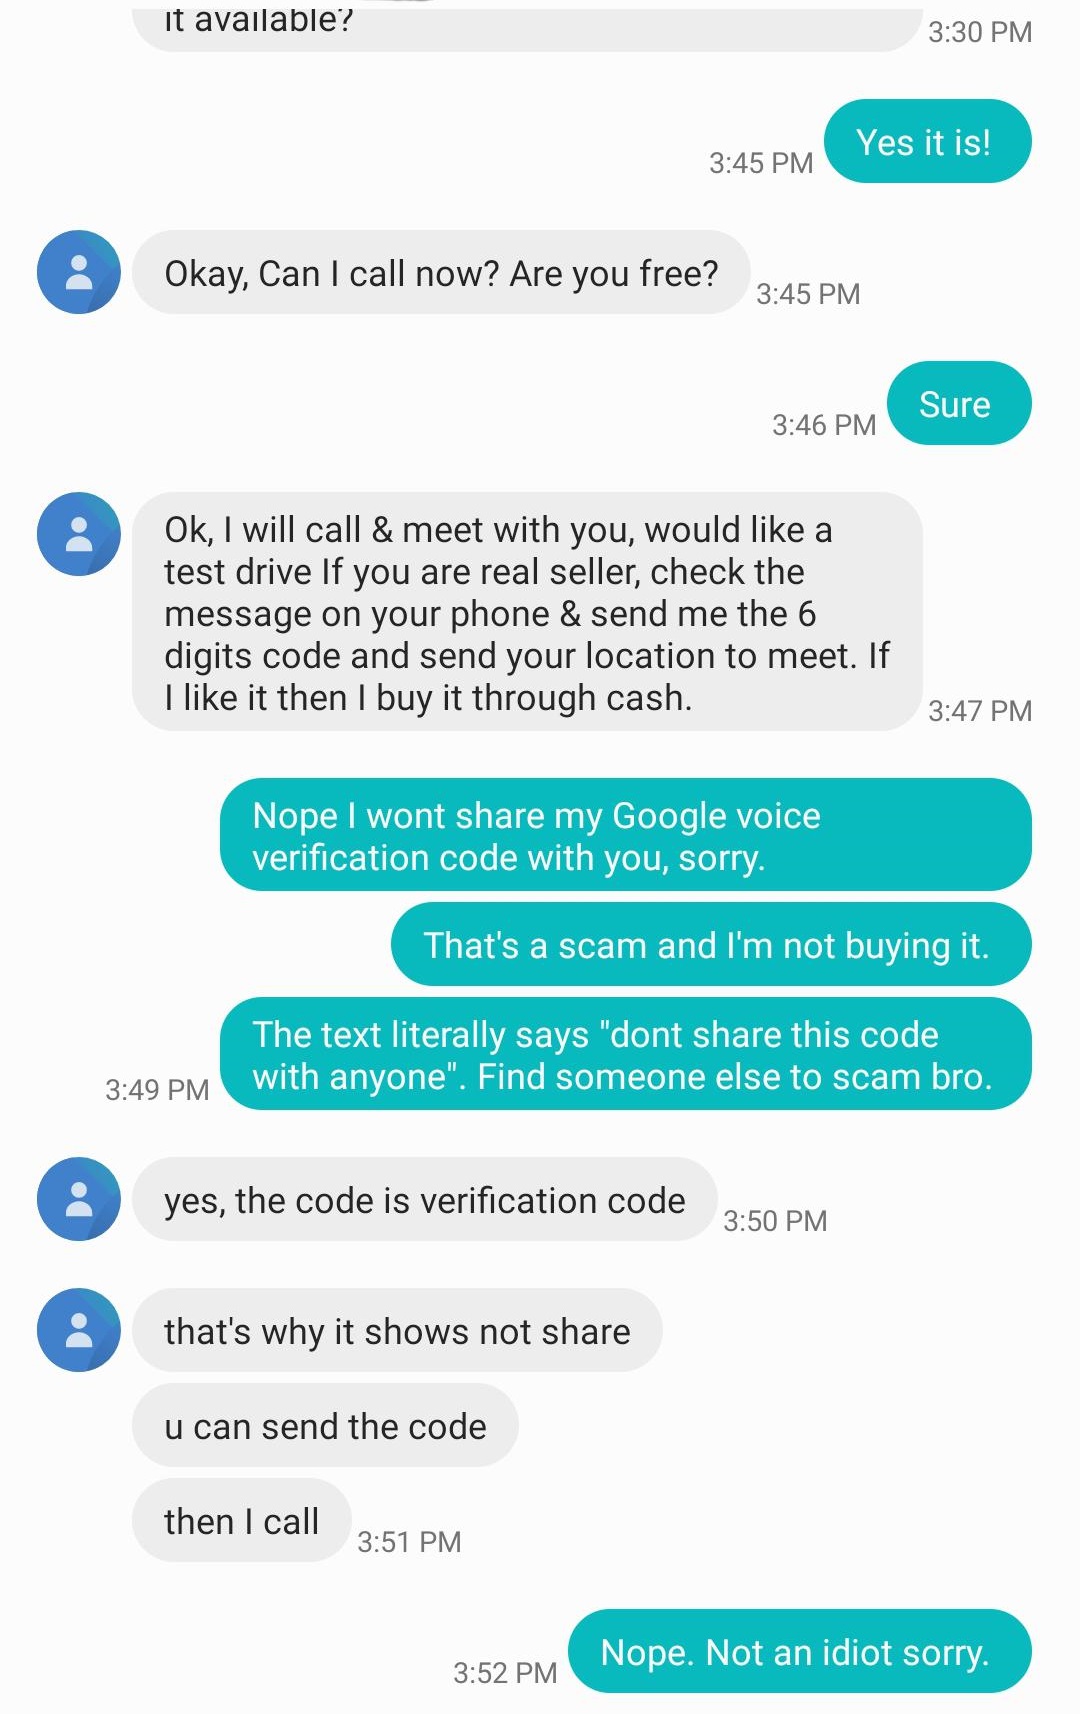 google verification code craigslist - it available? Yes it is! Okay, Can I call now? Are you free? Sure Ok, I will call & meet with you, would a test drive If you are real seller, check the message on your phone & send me the 6 digits code and send your l